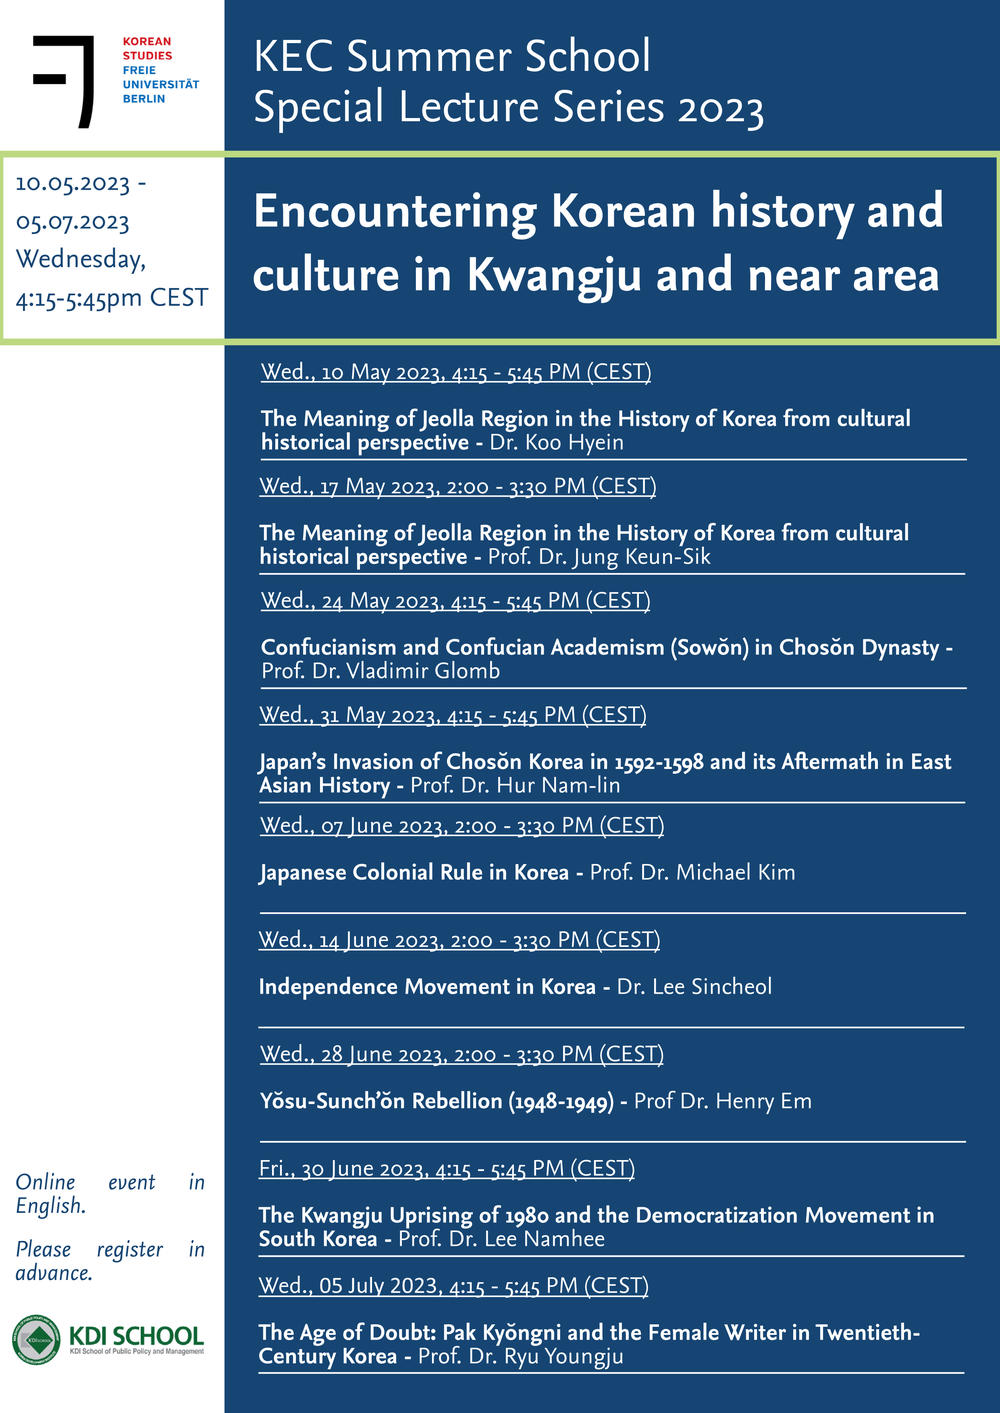 2023 Summer School Special Lecture Series - Encountering Korean history and culture in Kwangju and near area